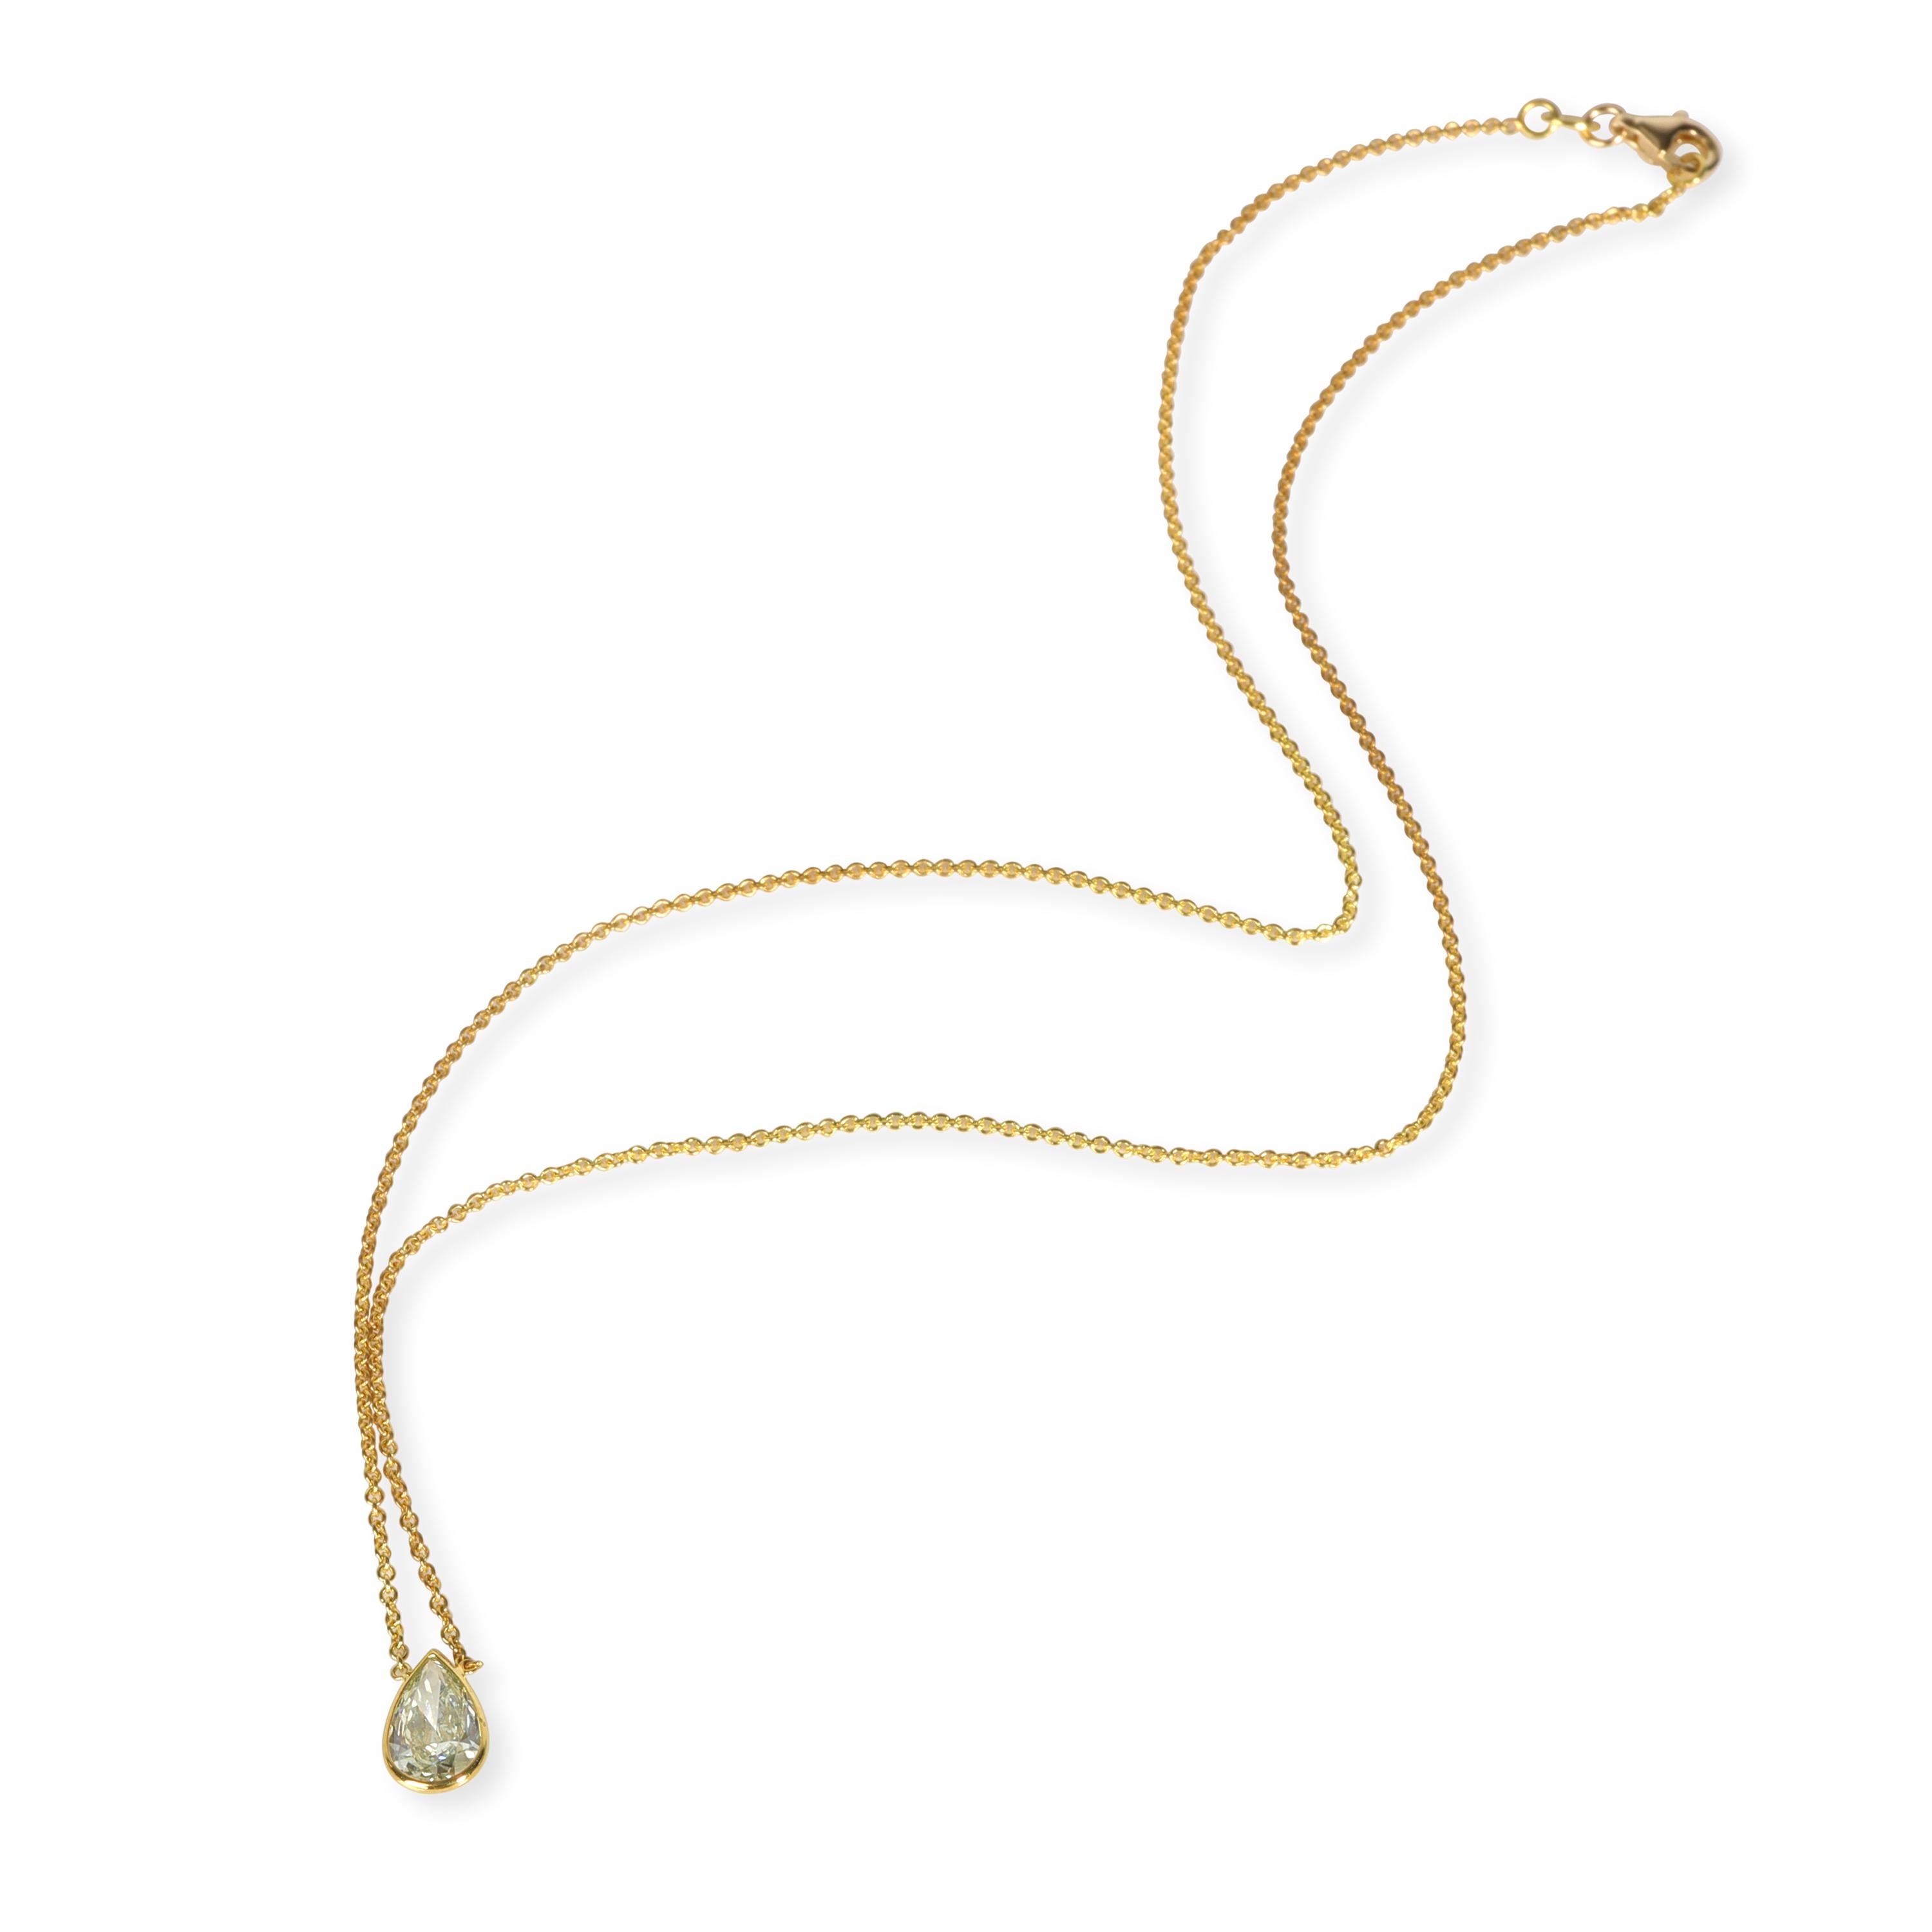 GIA Certified Fancy Yellow Diamond Necklace in 14K Yellow Gold SI1 1.61 CTW

PRIMARY DETAILS
SKU: 044813
Listing Title: GIA Certified Fancy Yellow Diamond Necklace in 14K Yellow Gold SI1 1.61 CTW
Condition Description: In excellent condition and